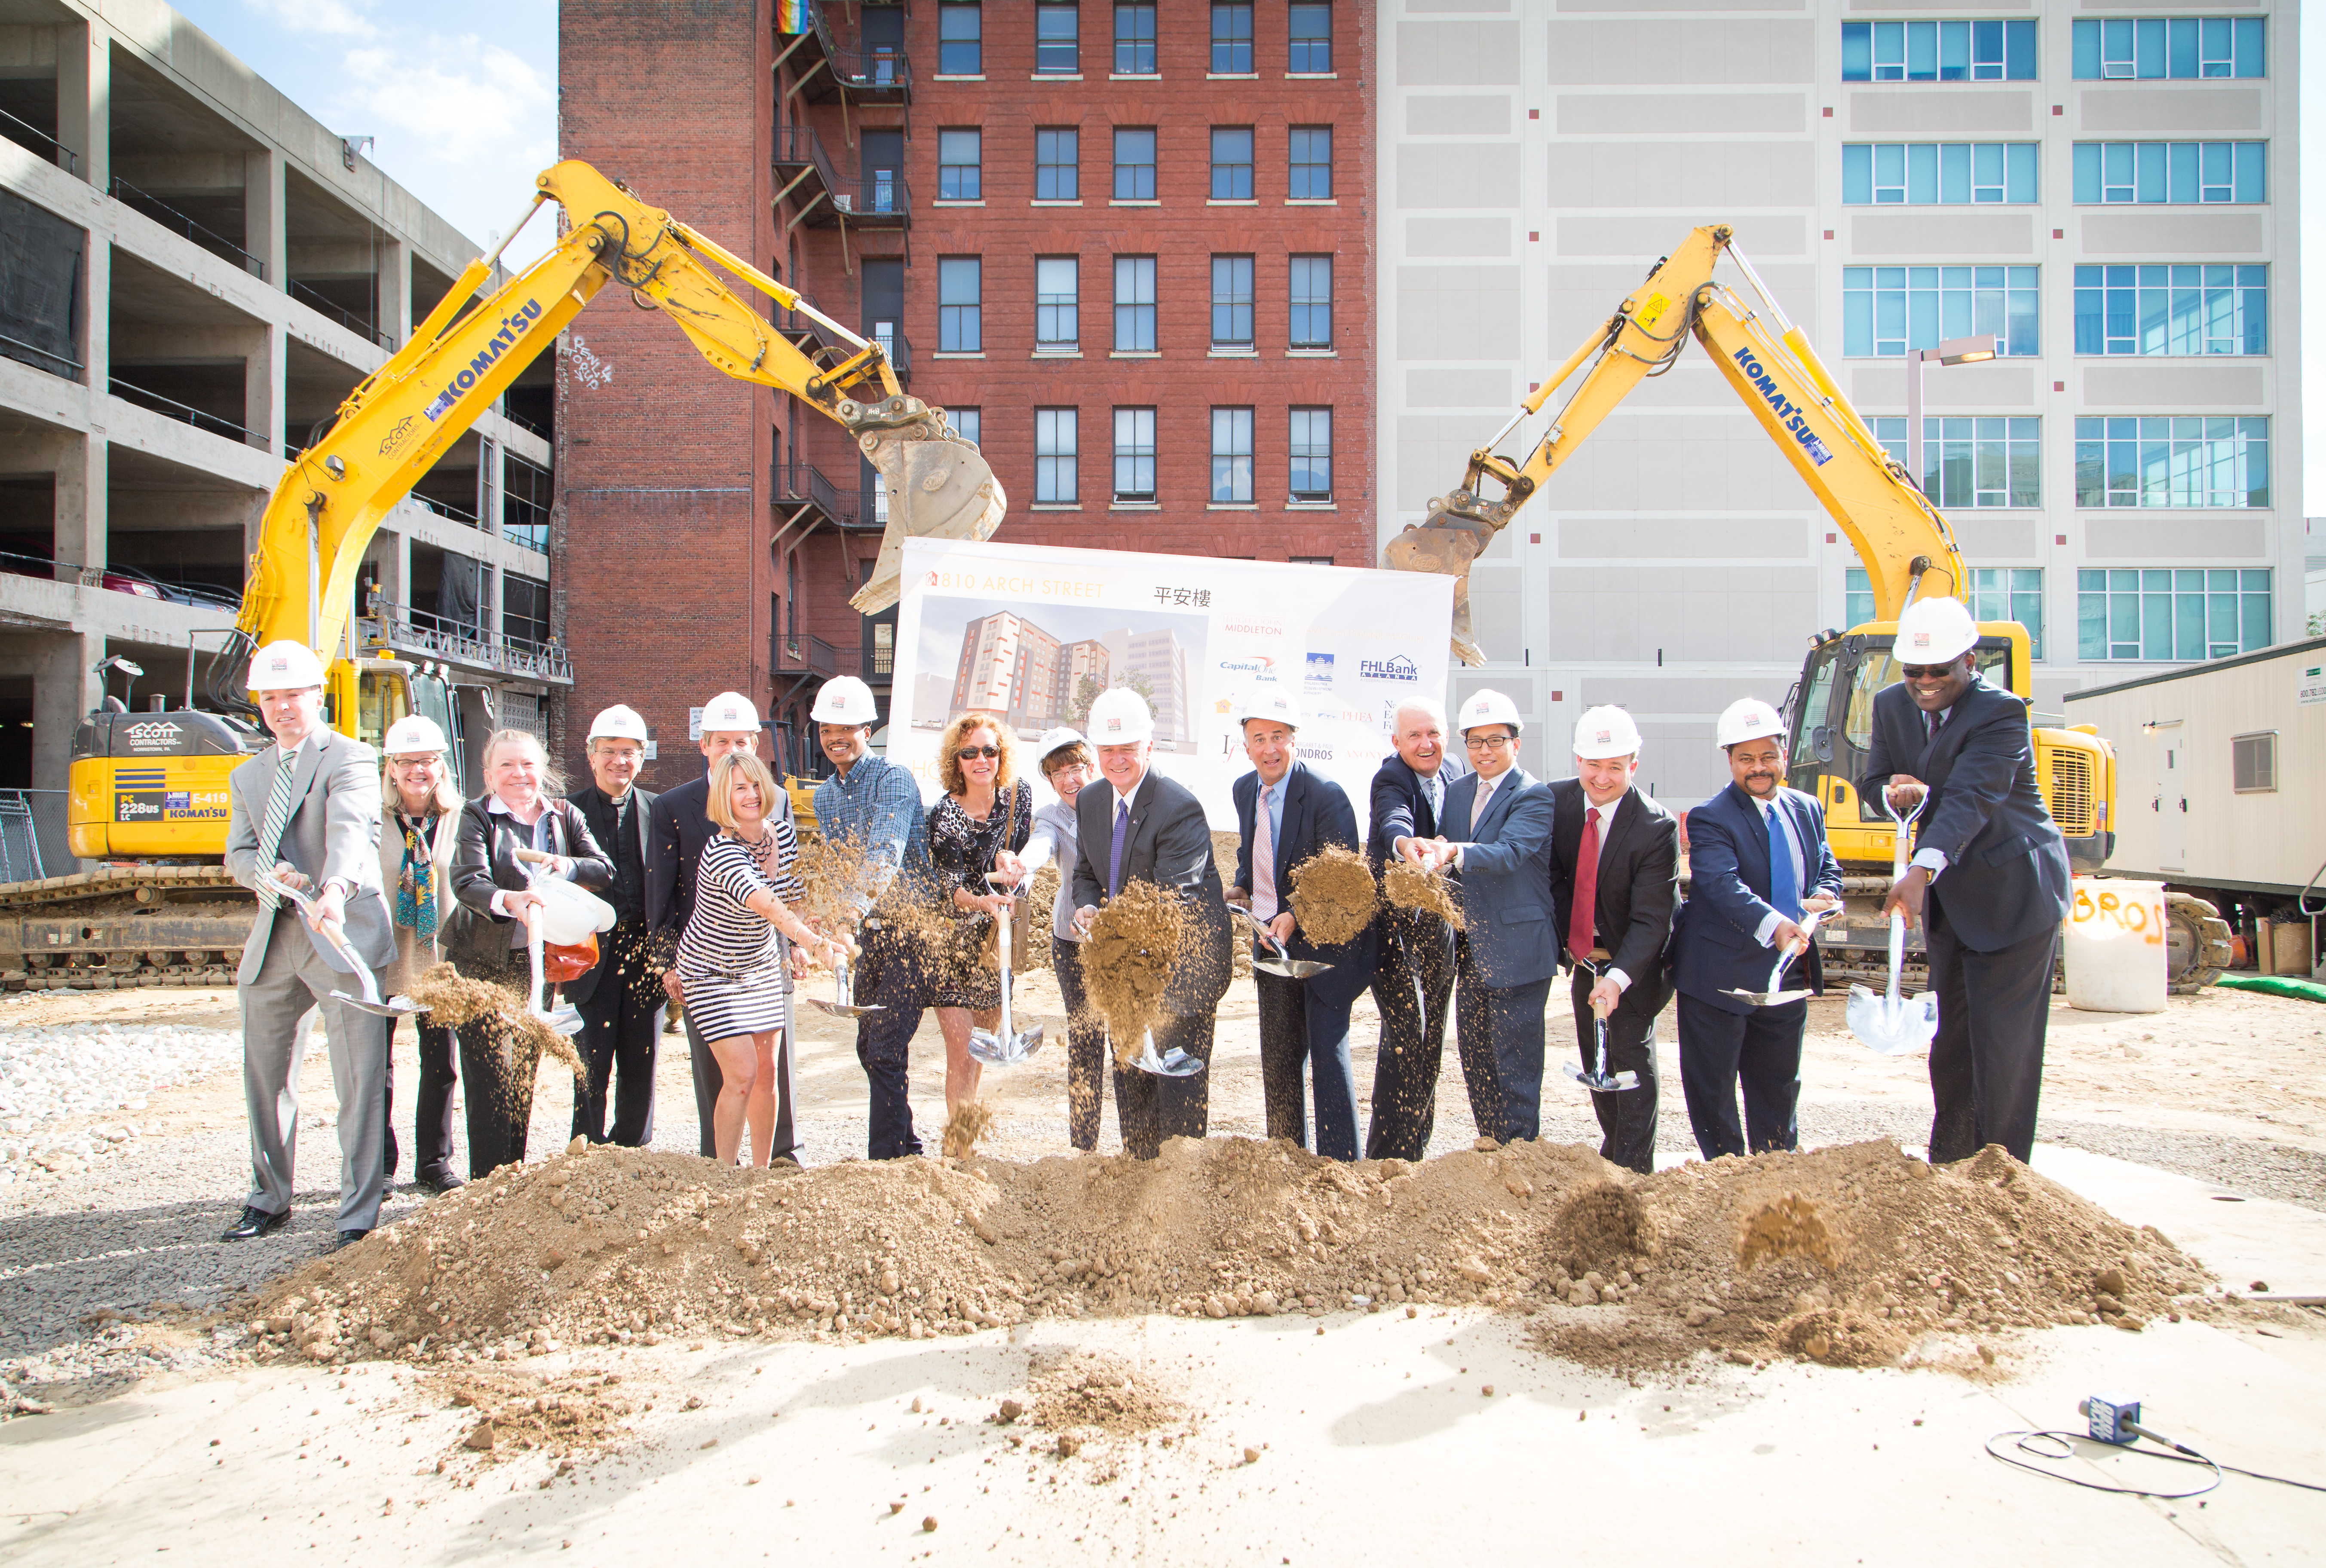 Groundbreaking for PCDC & Project Home development at 810 Arch St